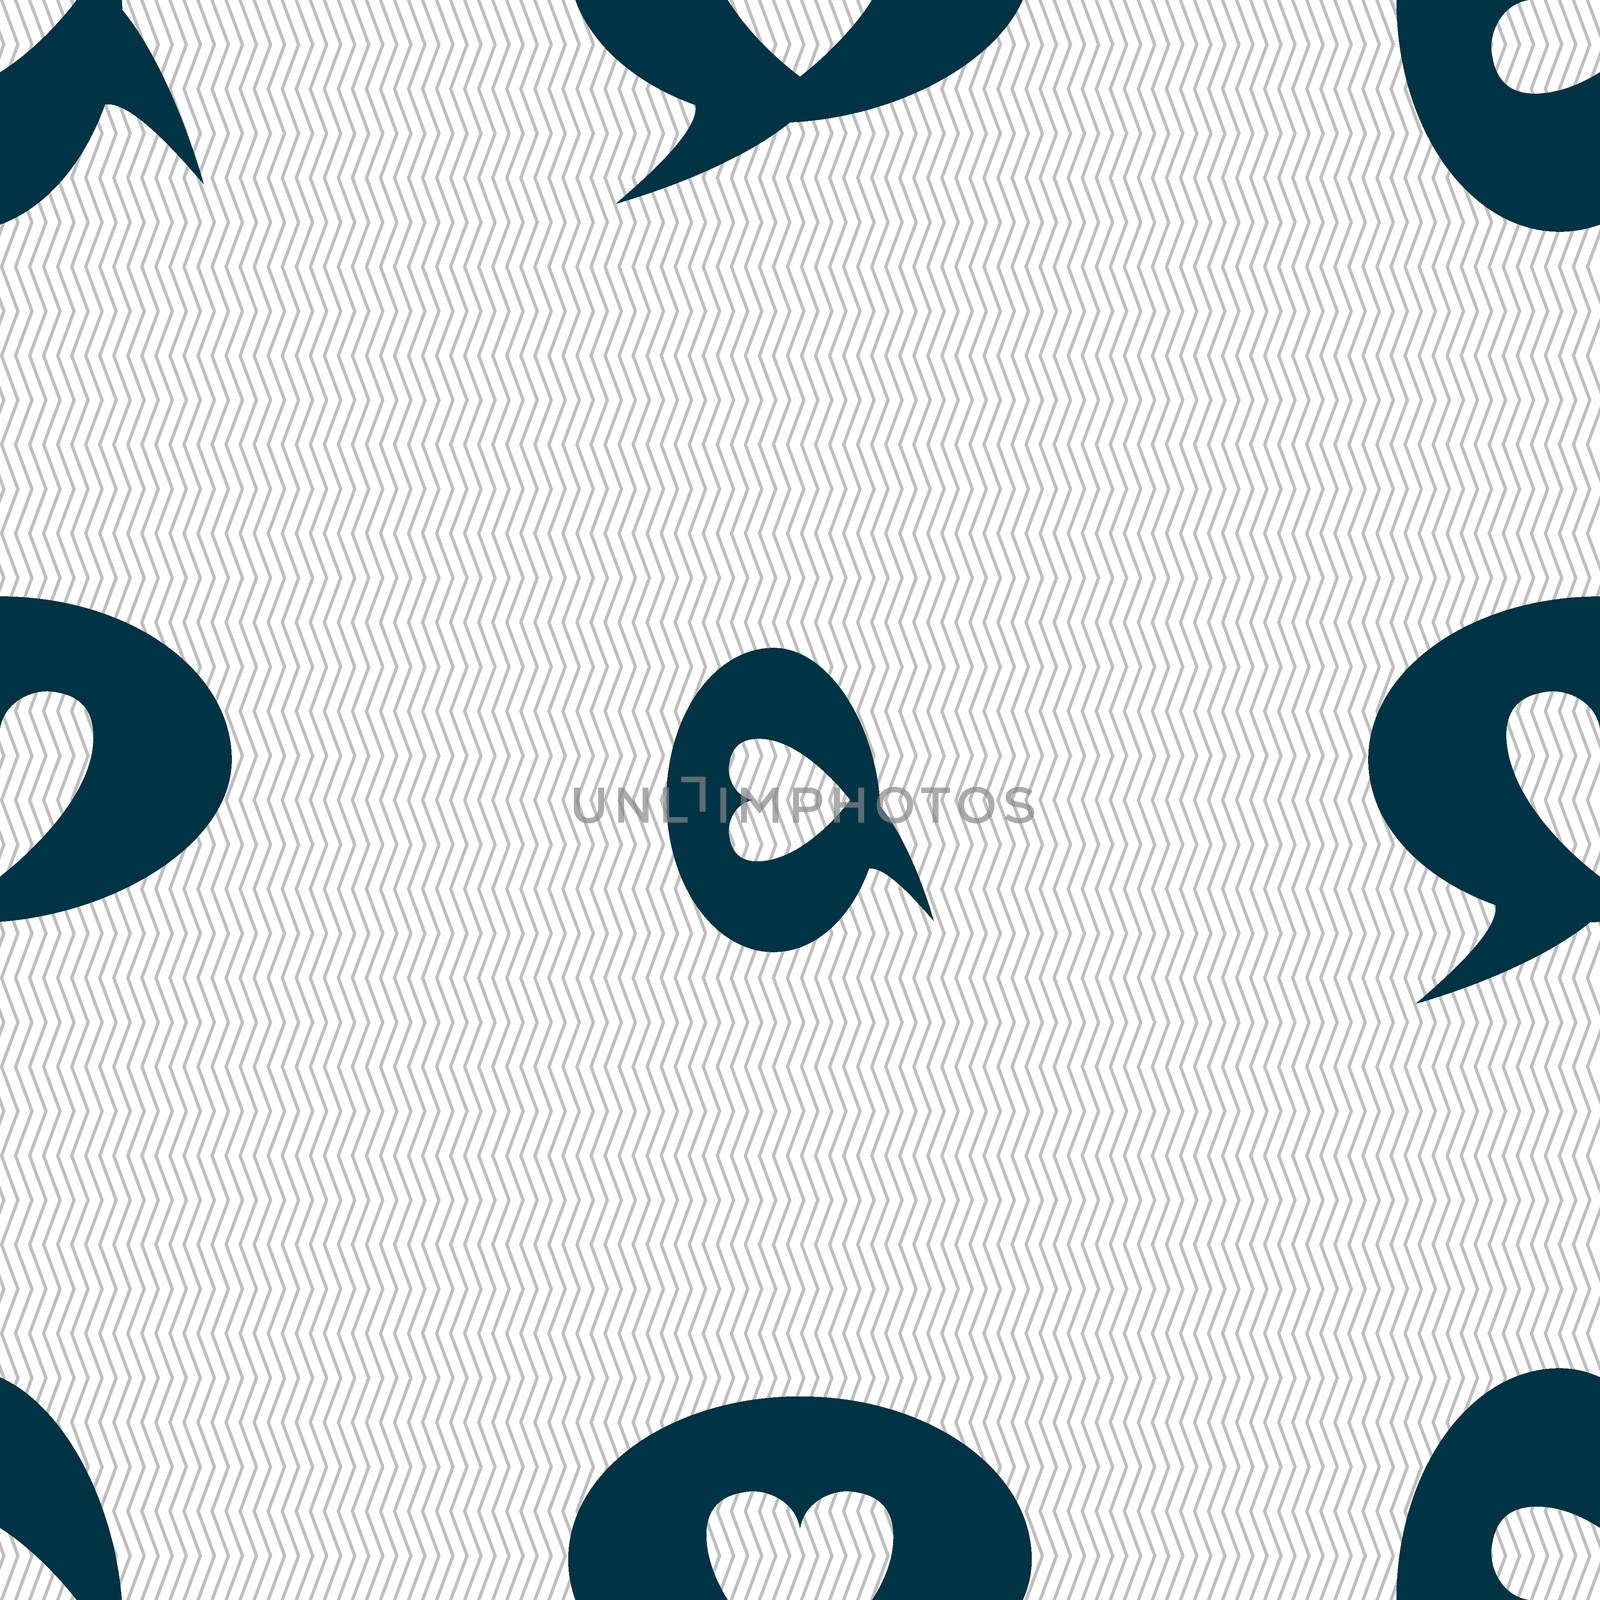 Heart sign icon. Love symbol. Seamless abstract background with geometric shapes.  by serhii_lohvyniuk